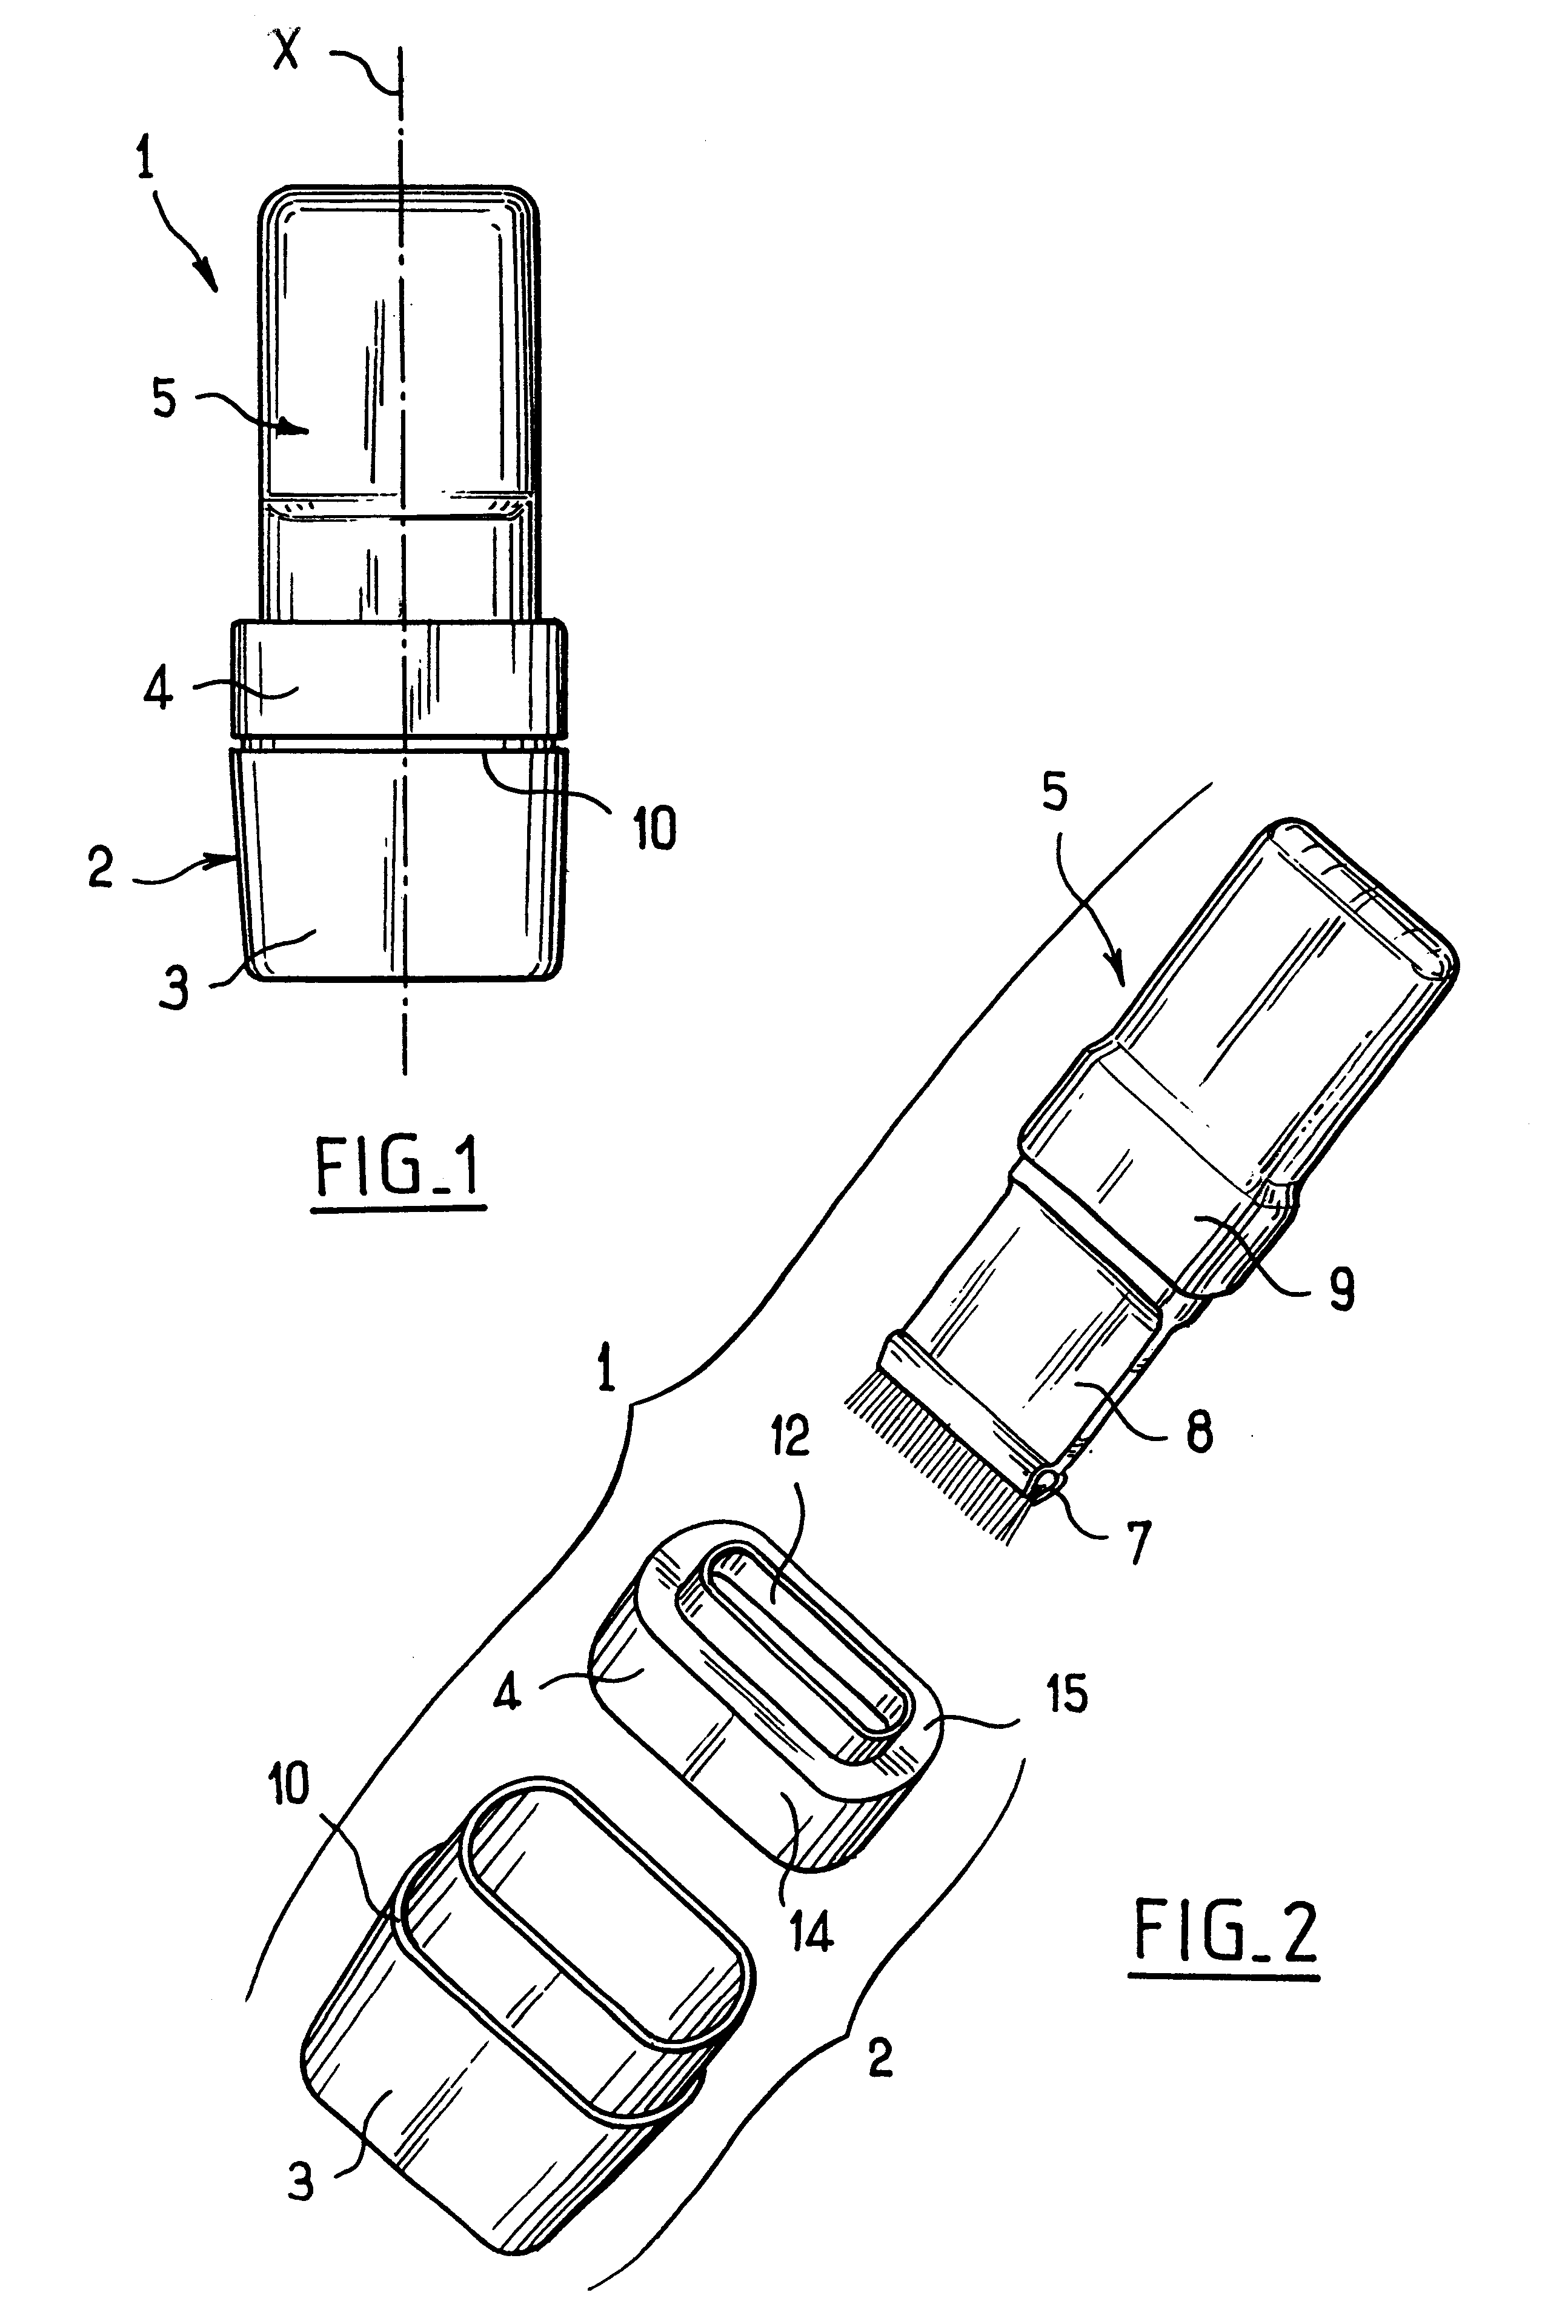 Device for packaging and applying a substance, the device having a wiper member with a slot